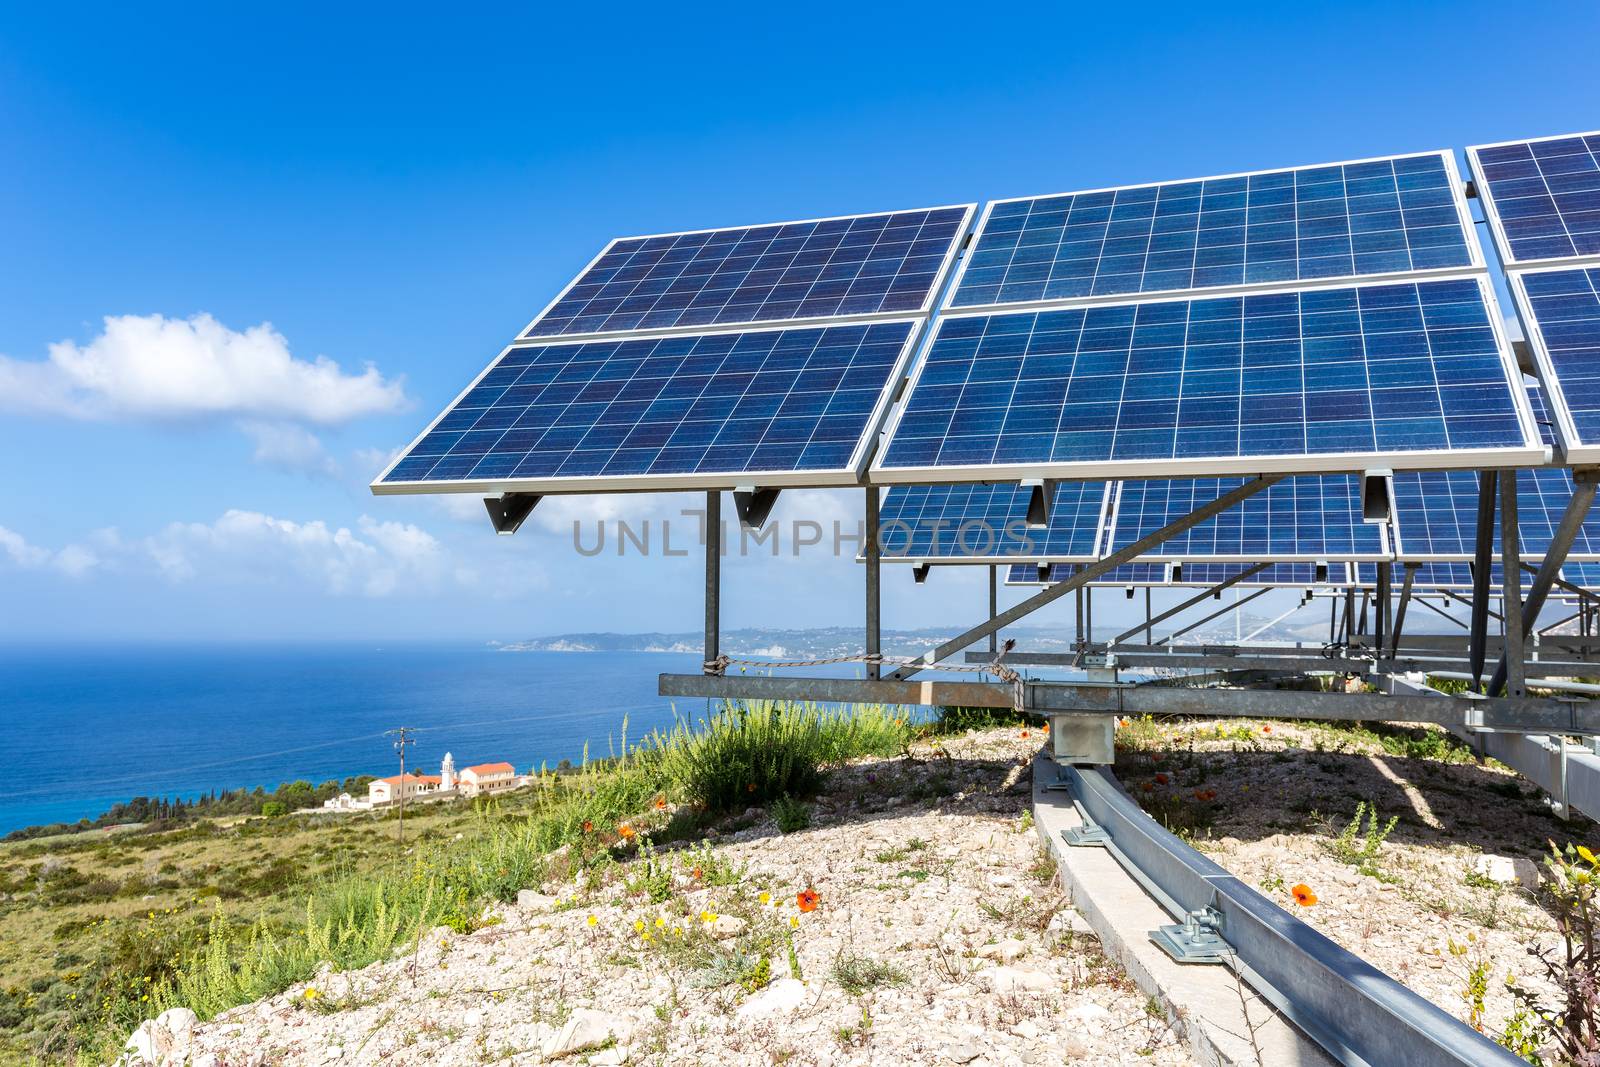 Solar panels near blue sea and monastry by BenSchonewille